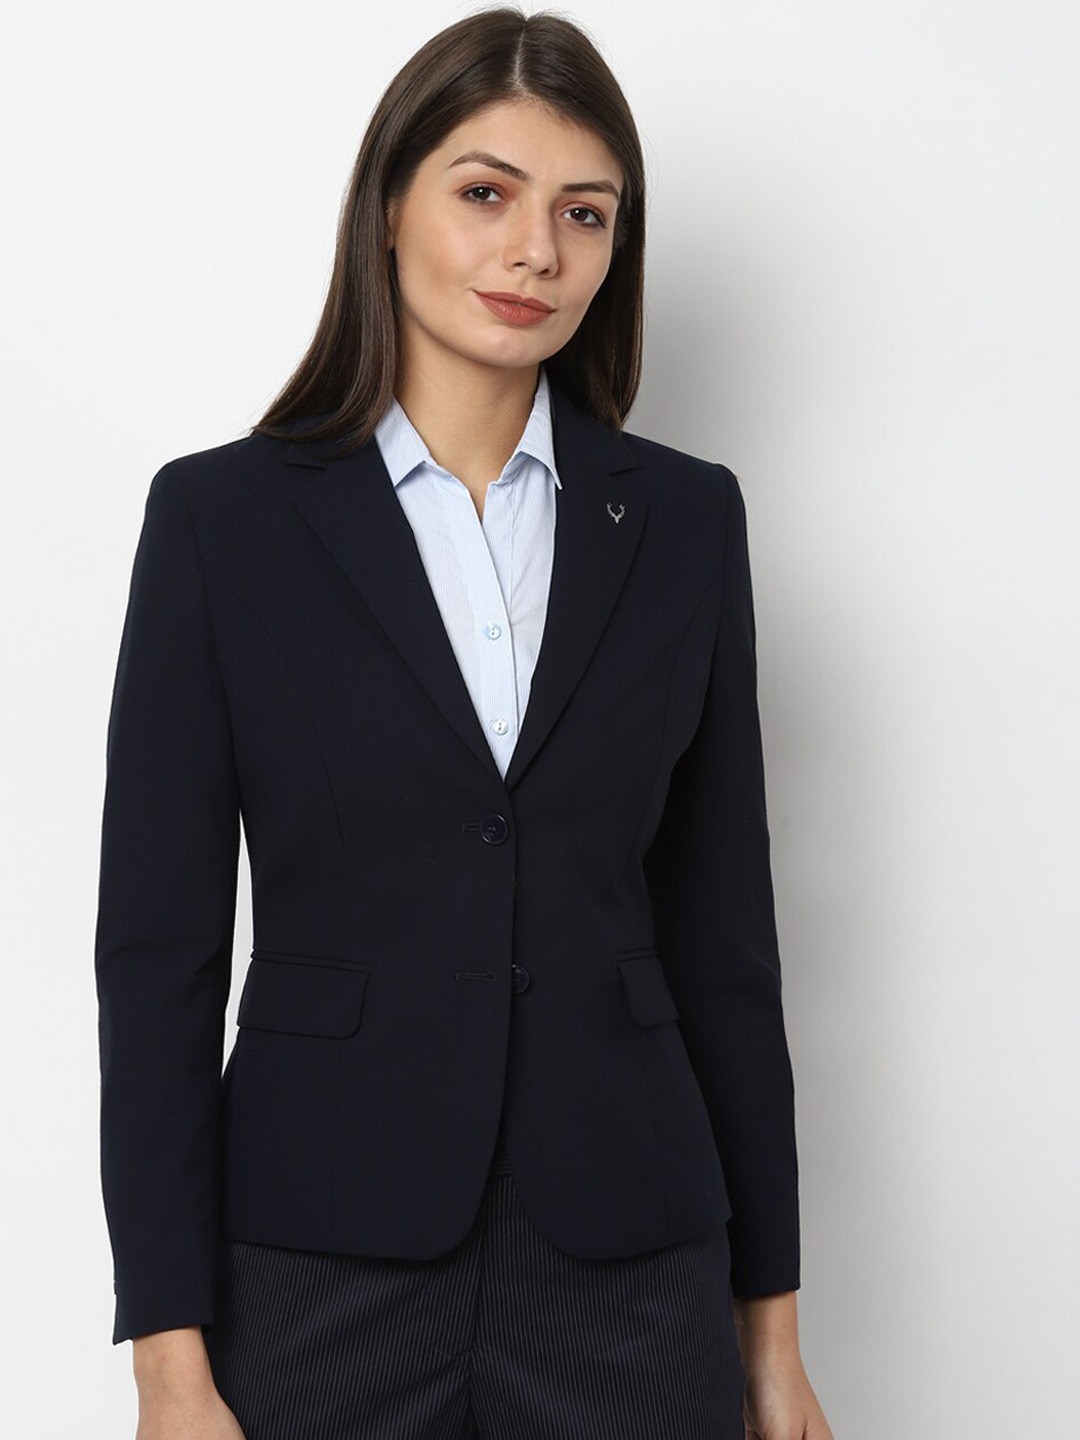 Clothing Blazers | Allen Solly Woman Women Navy Blue Solid Slim-Fit Single-Breasted Blazer - IG13131